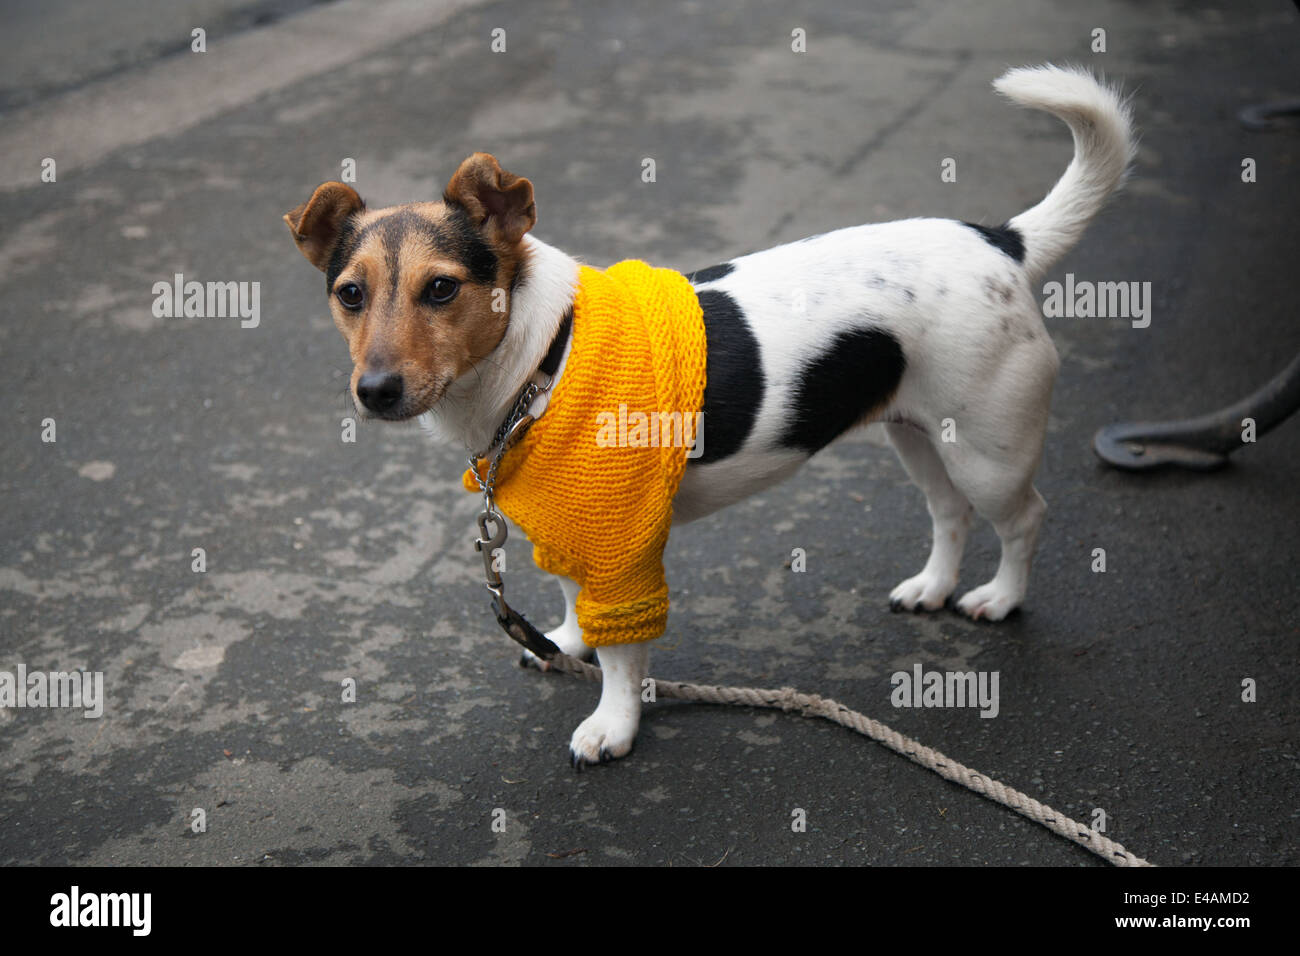 West Tanfield, Yorkshire, UK. 5th July, 2014.  Jack Russell Terrier in yellow Tour de France jumper. Stock Photo